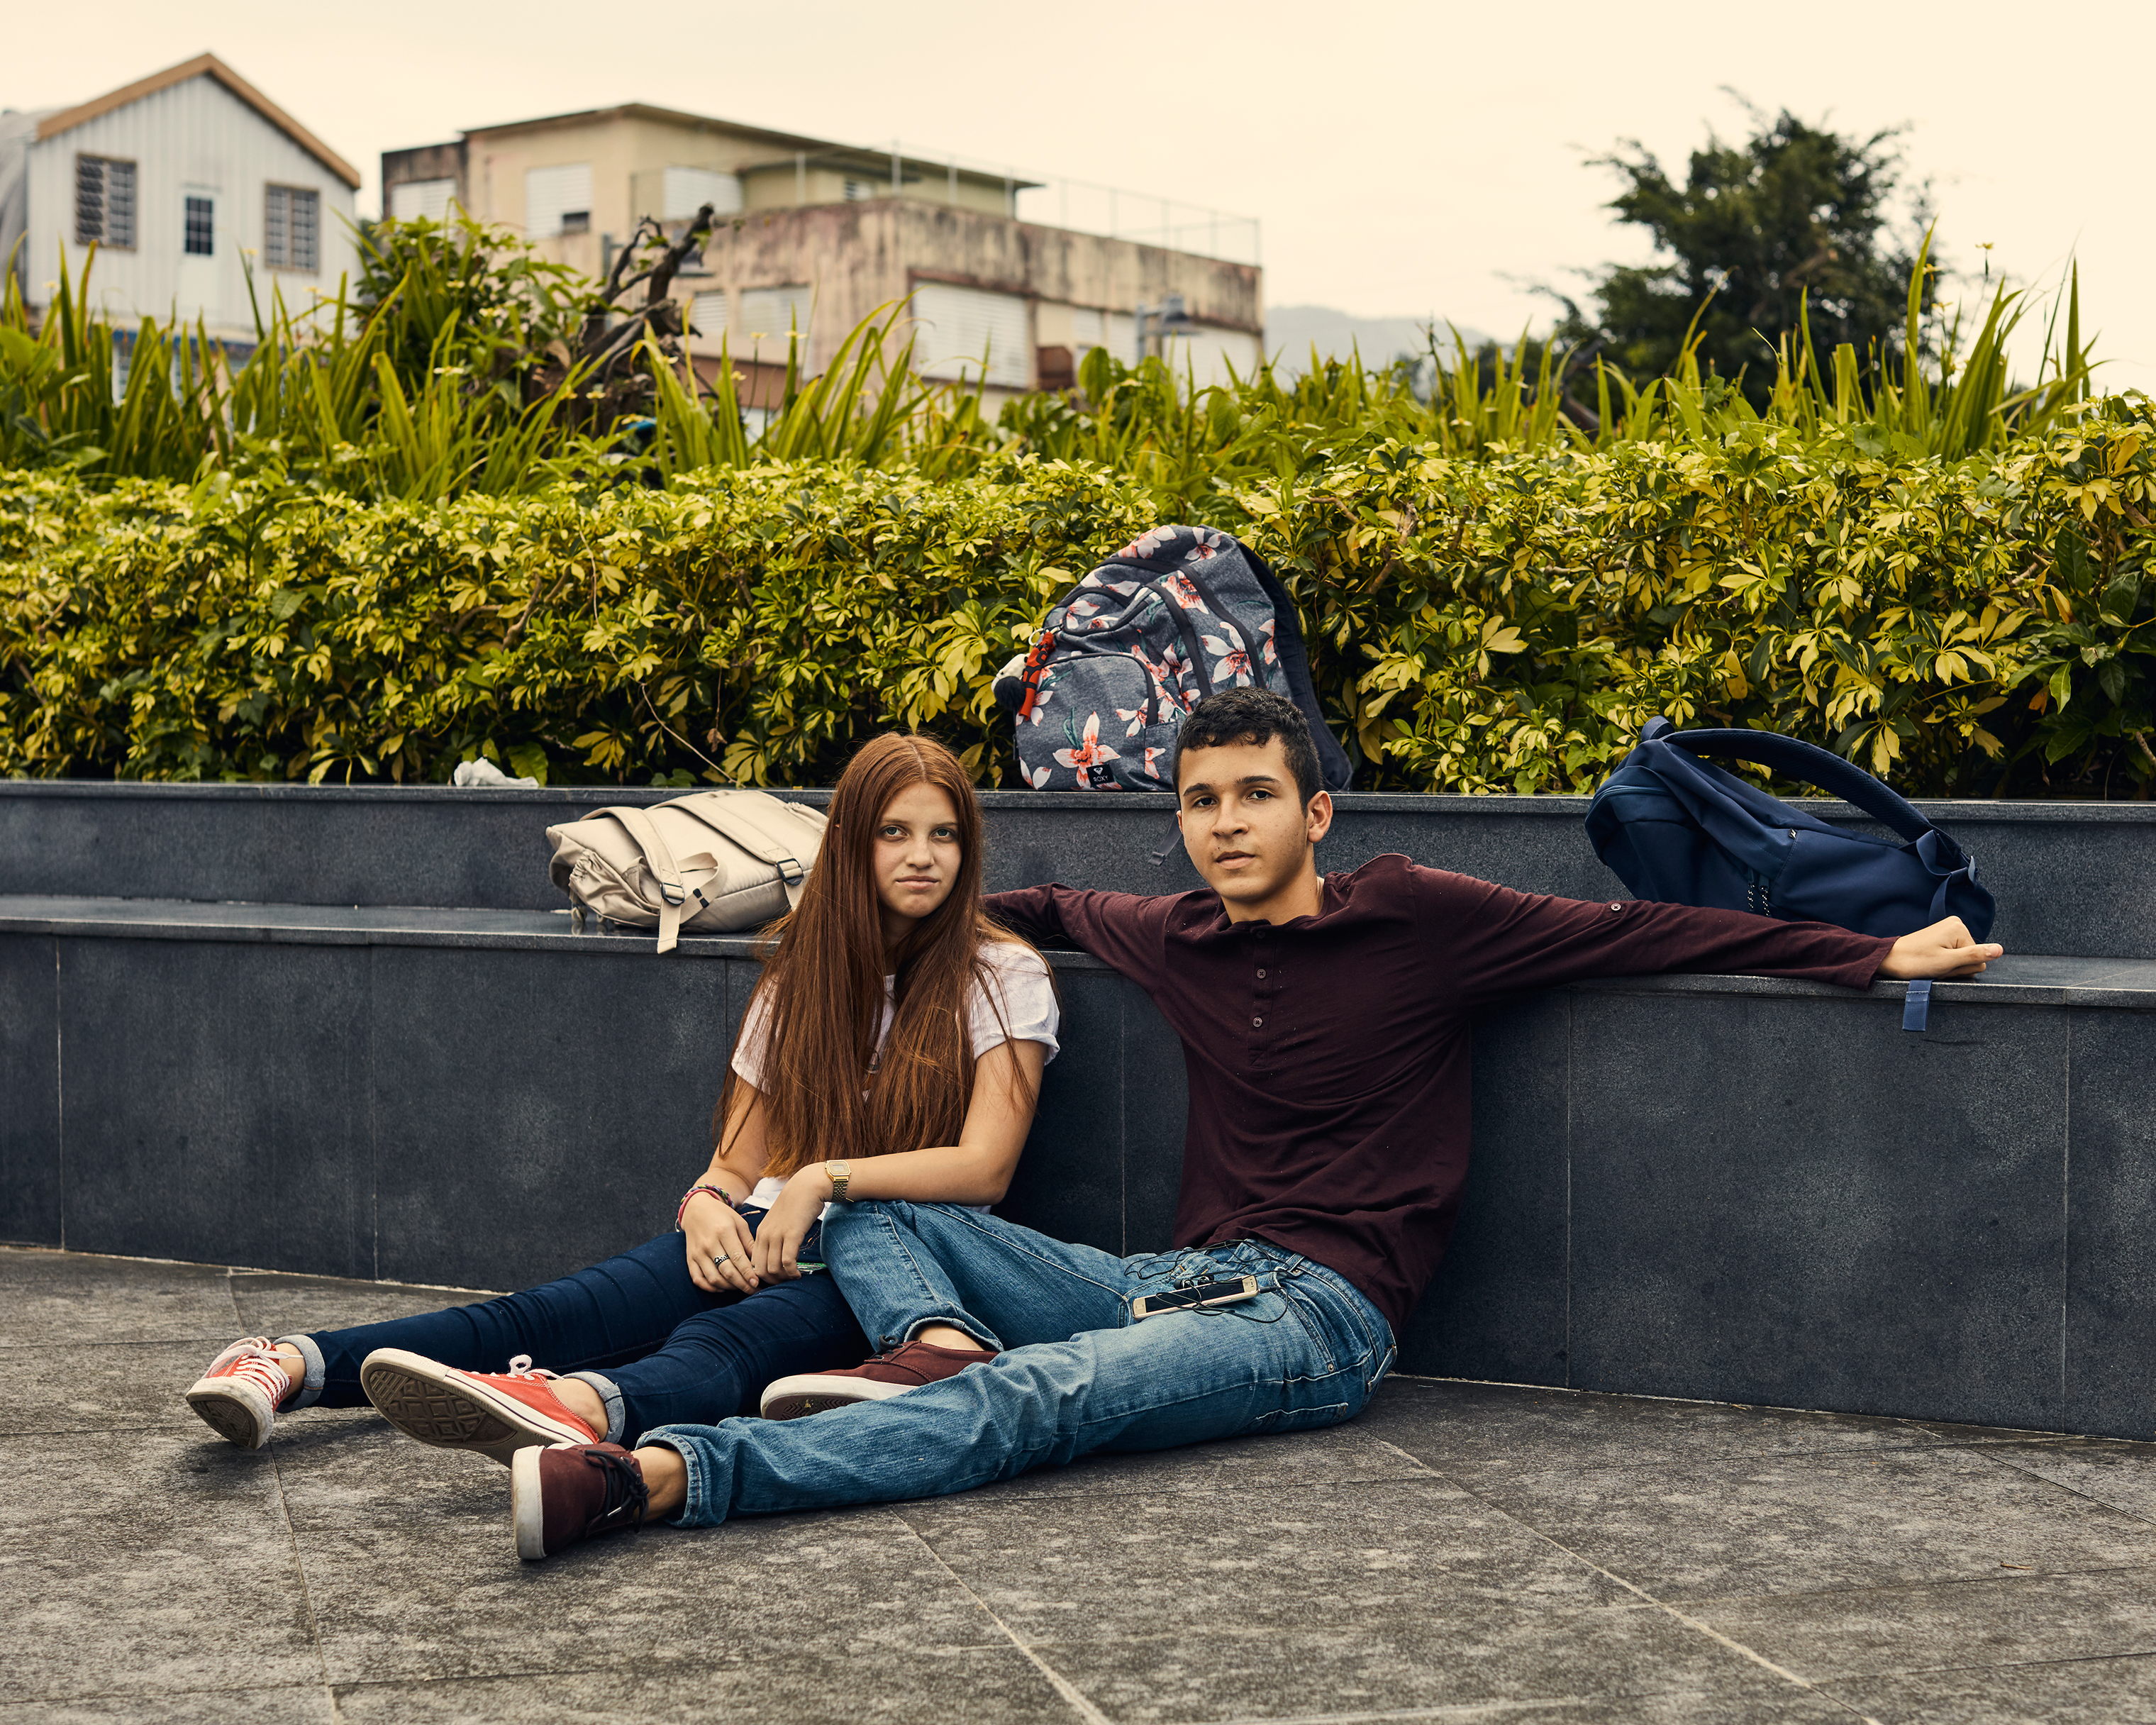 Nahielys Gonzales and Yamil Rodríguez after school in the town square of Utuado. (Christopher Gregory for TIME)